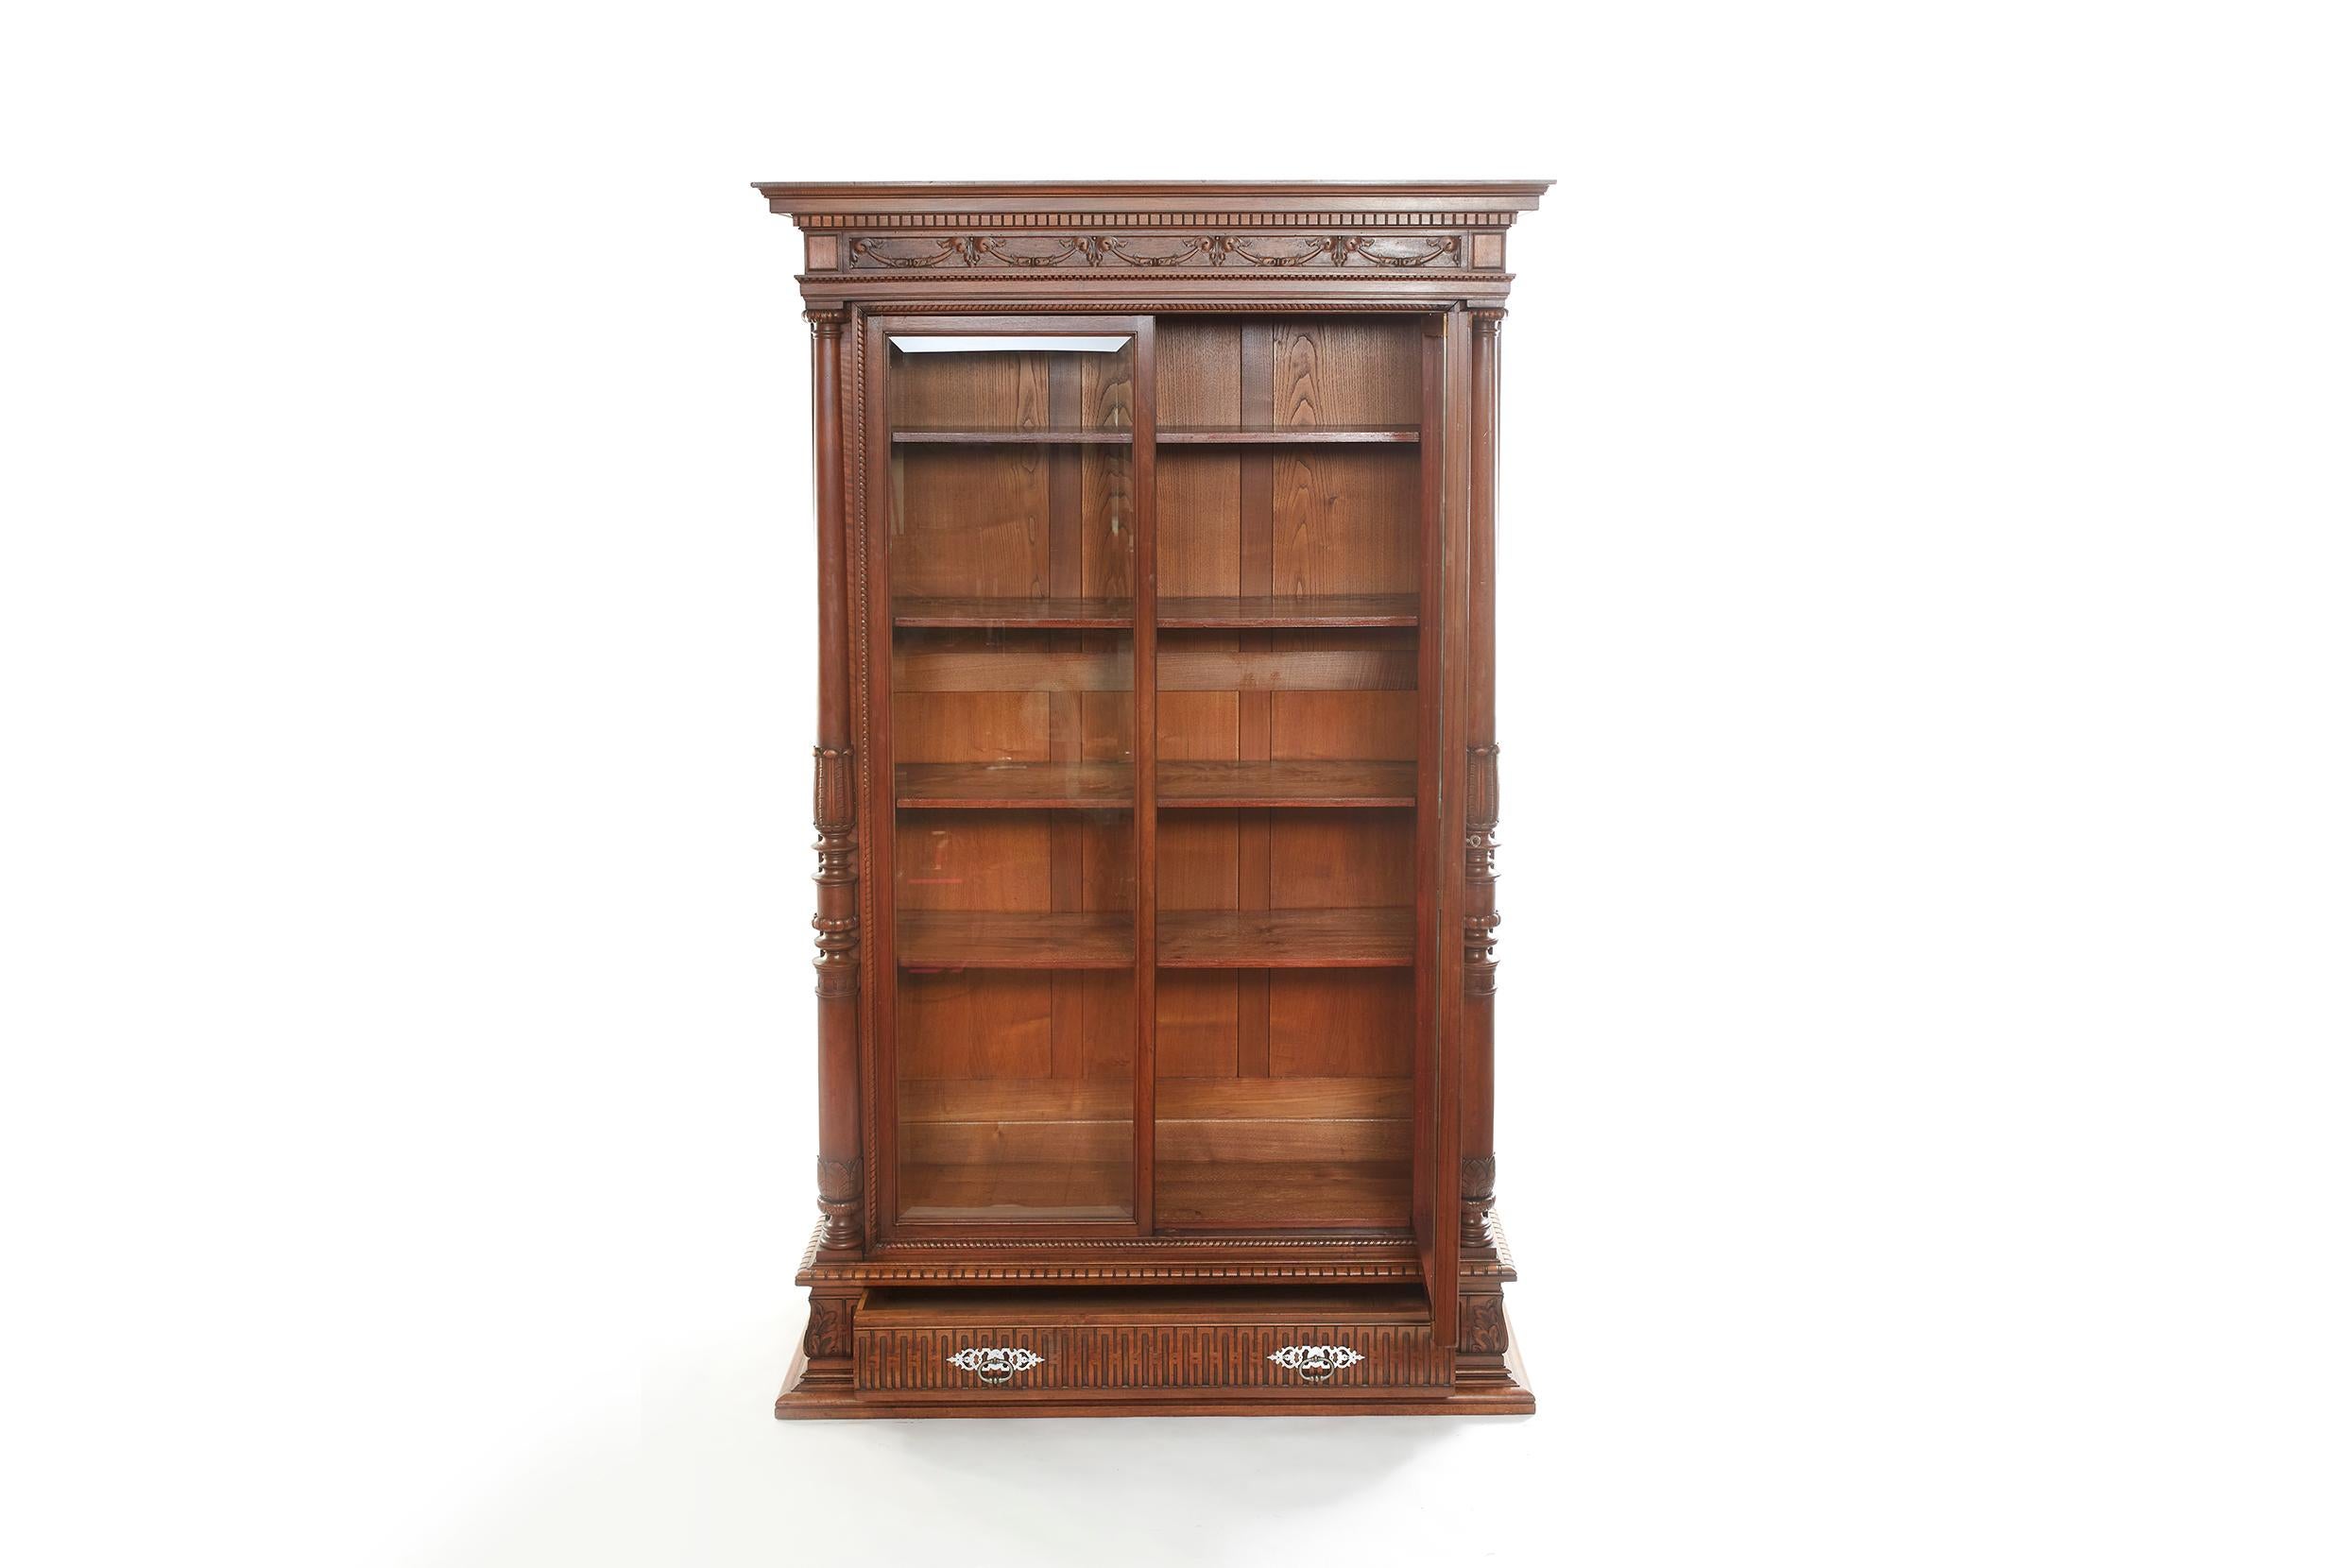 Mid 19th century French Chaleyssin Freres Louis Philippe style hand carved walnut two doors display cabinet / bookcase with exterior hand carved design details. The display cabinet / bookcase is in great antique condition. Maker's mark signed. Minor